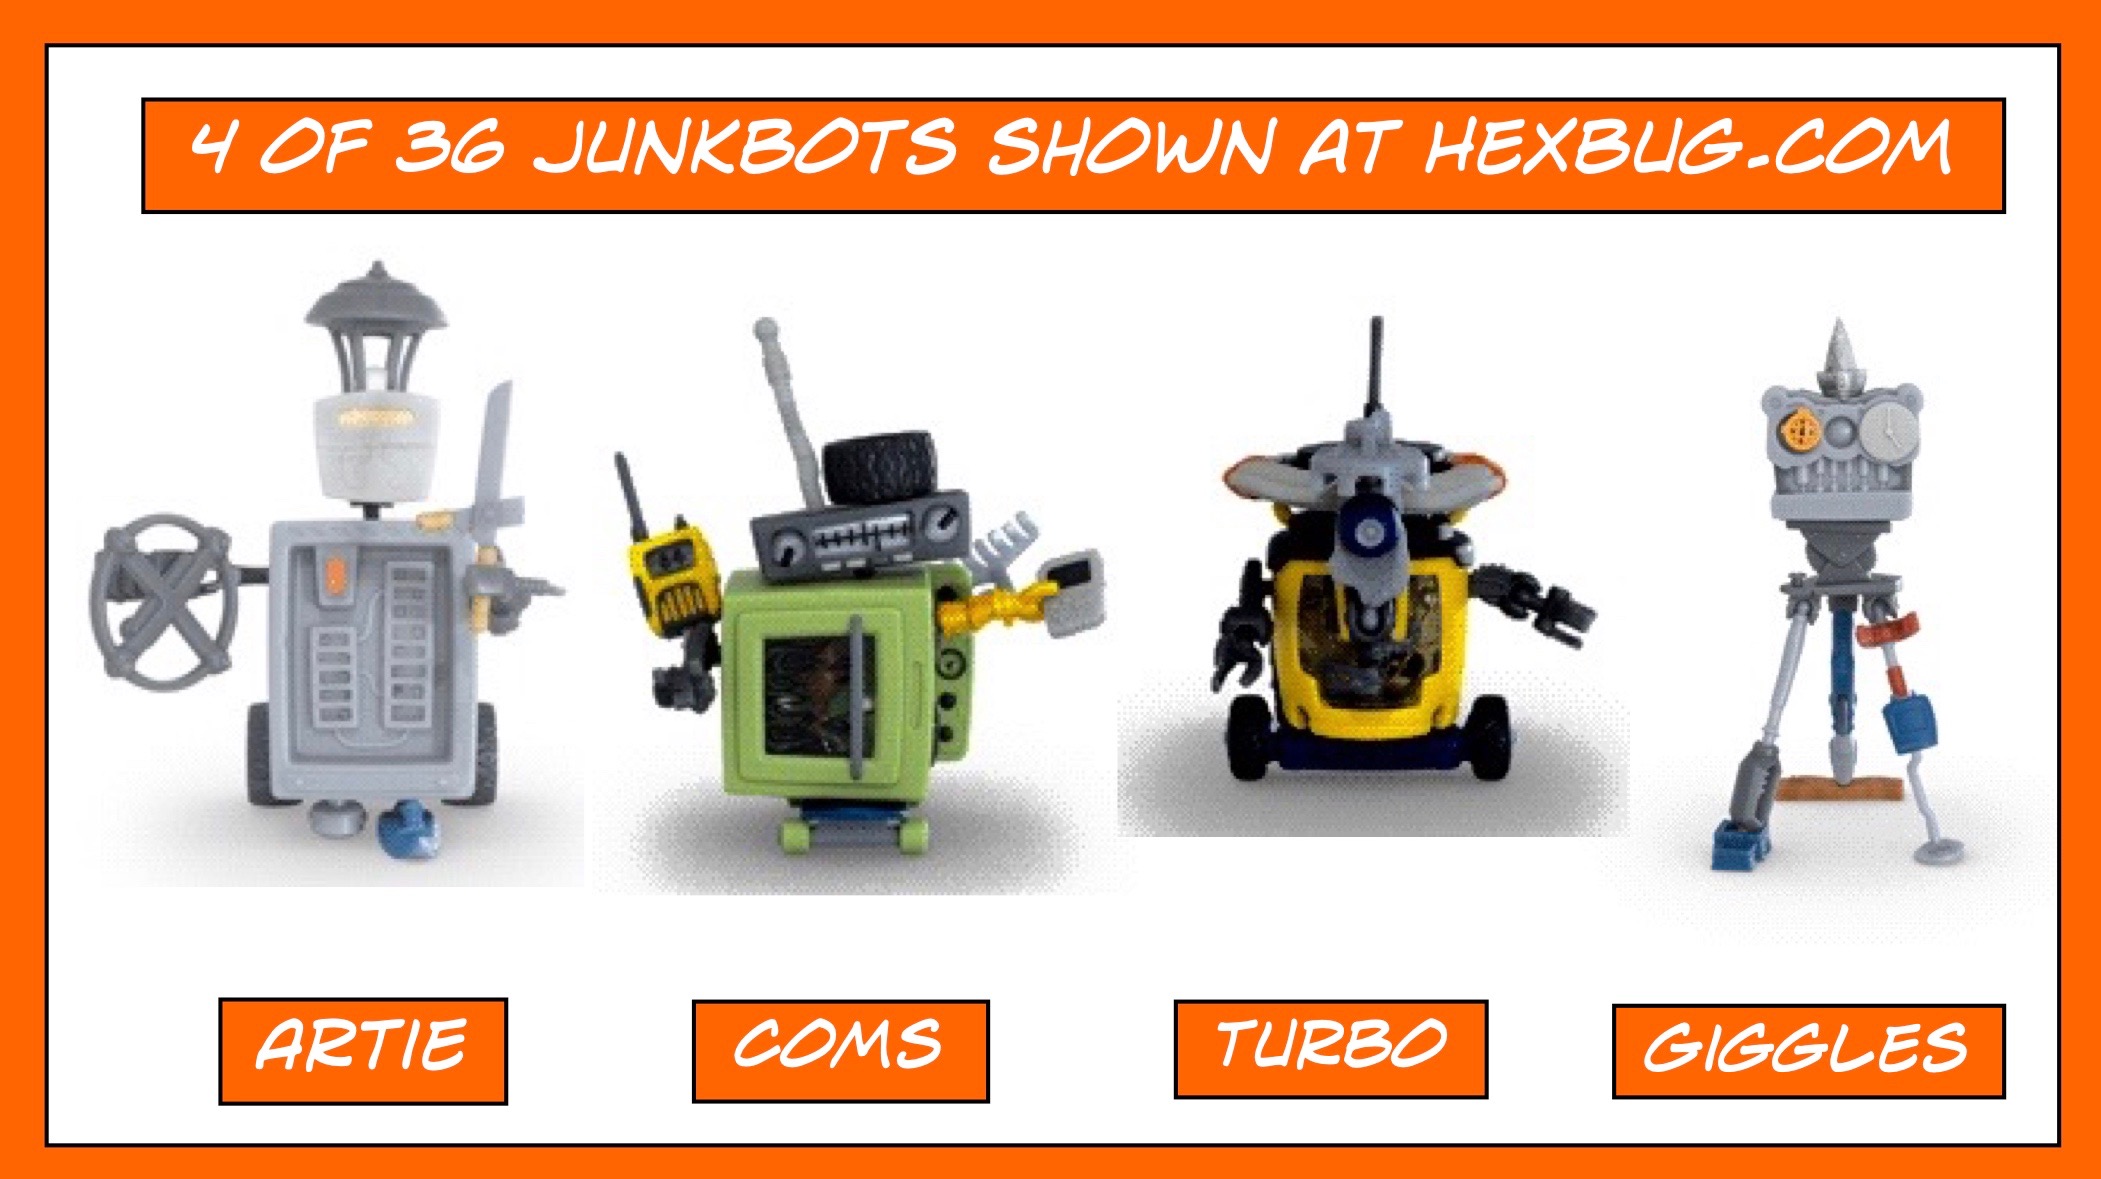 Artie, Turbo, Coms, and Giggles Junkbots